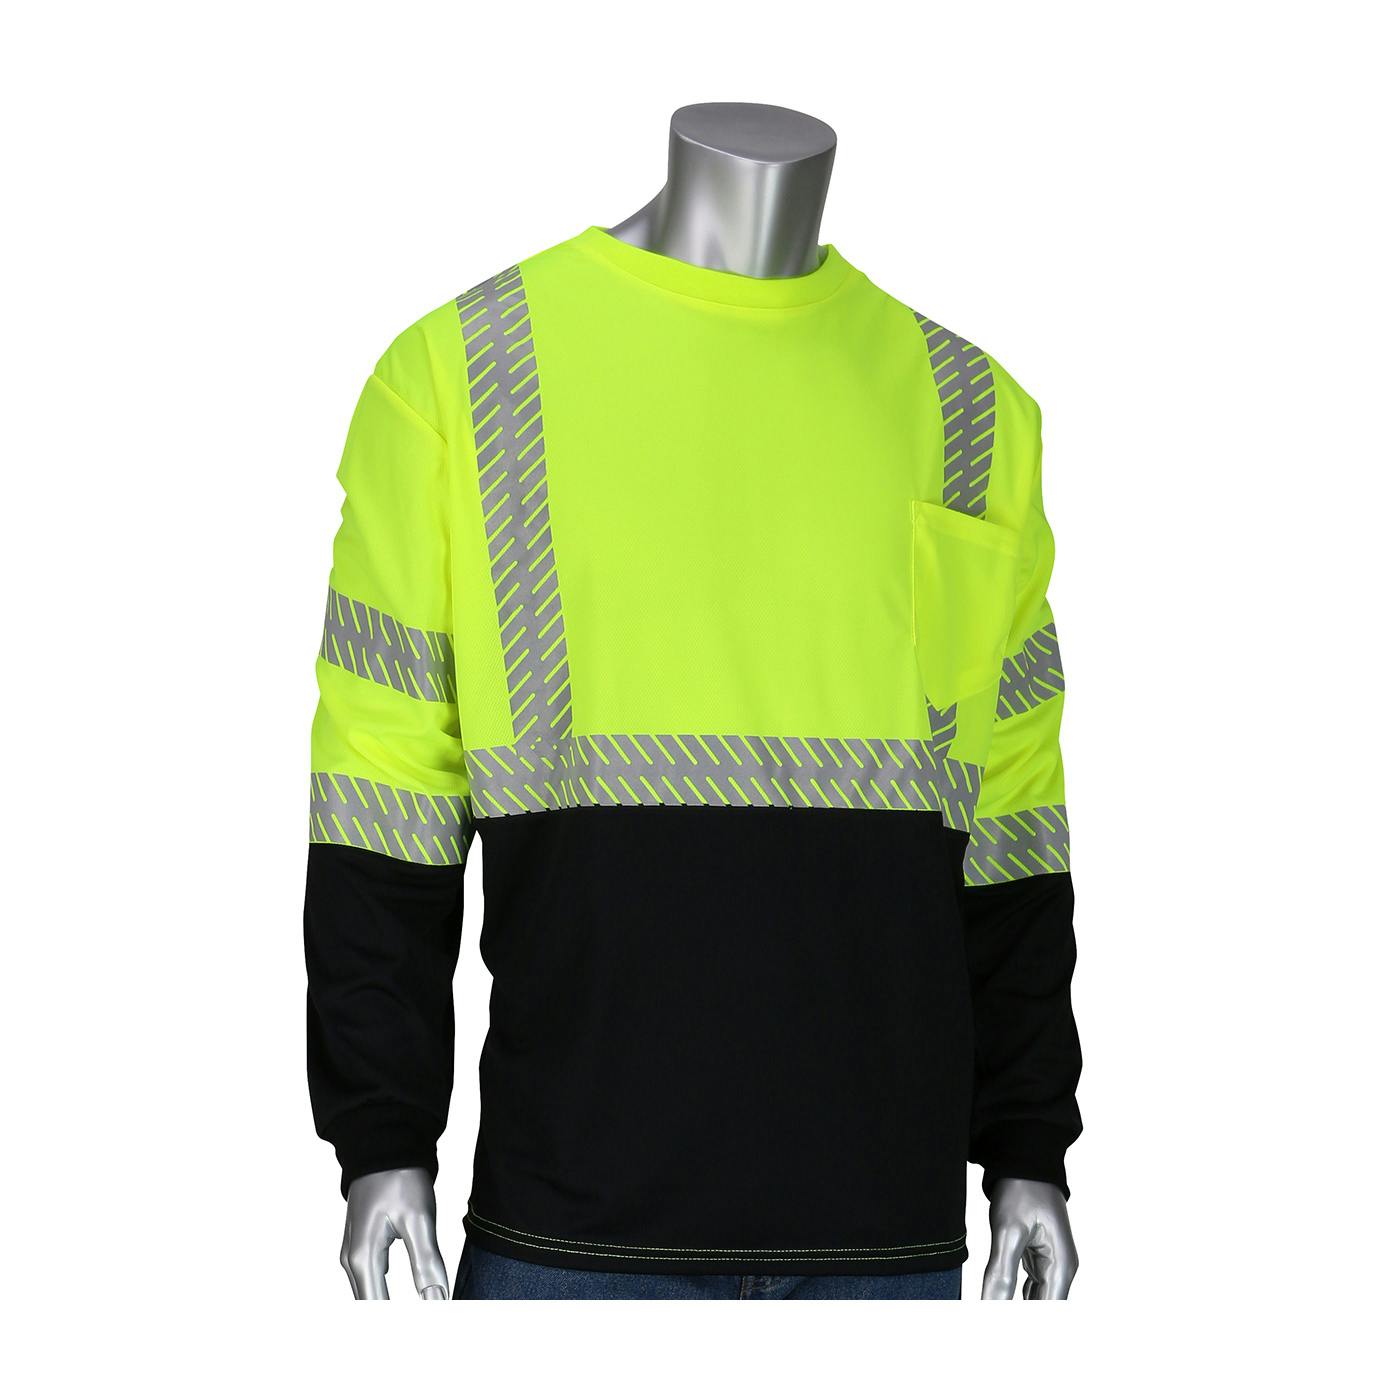 ANSI Type R Class 3 Long Sleeve T-Shirt with 50+ UPF Sun Protection, Built-in Insect Repellent and Black Bottom Front, Hi-Vis Yellow (313-1375B)_1